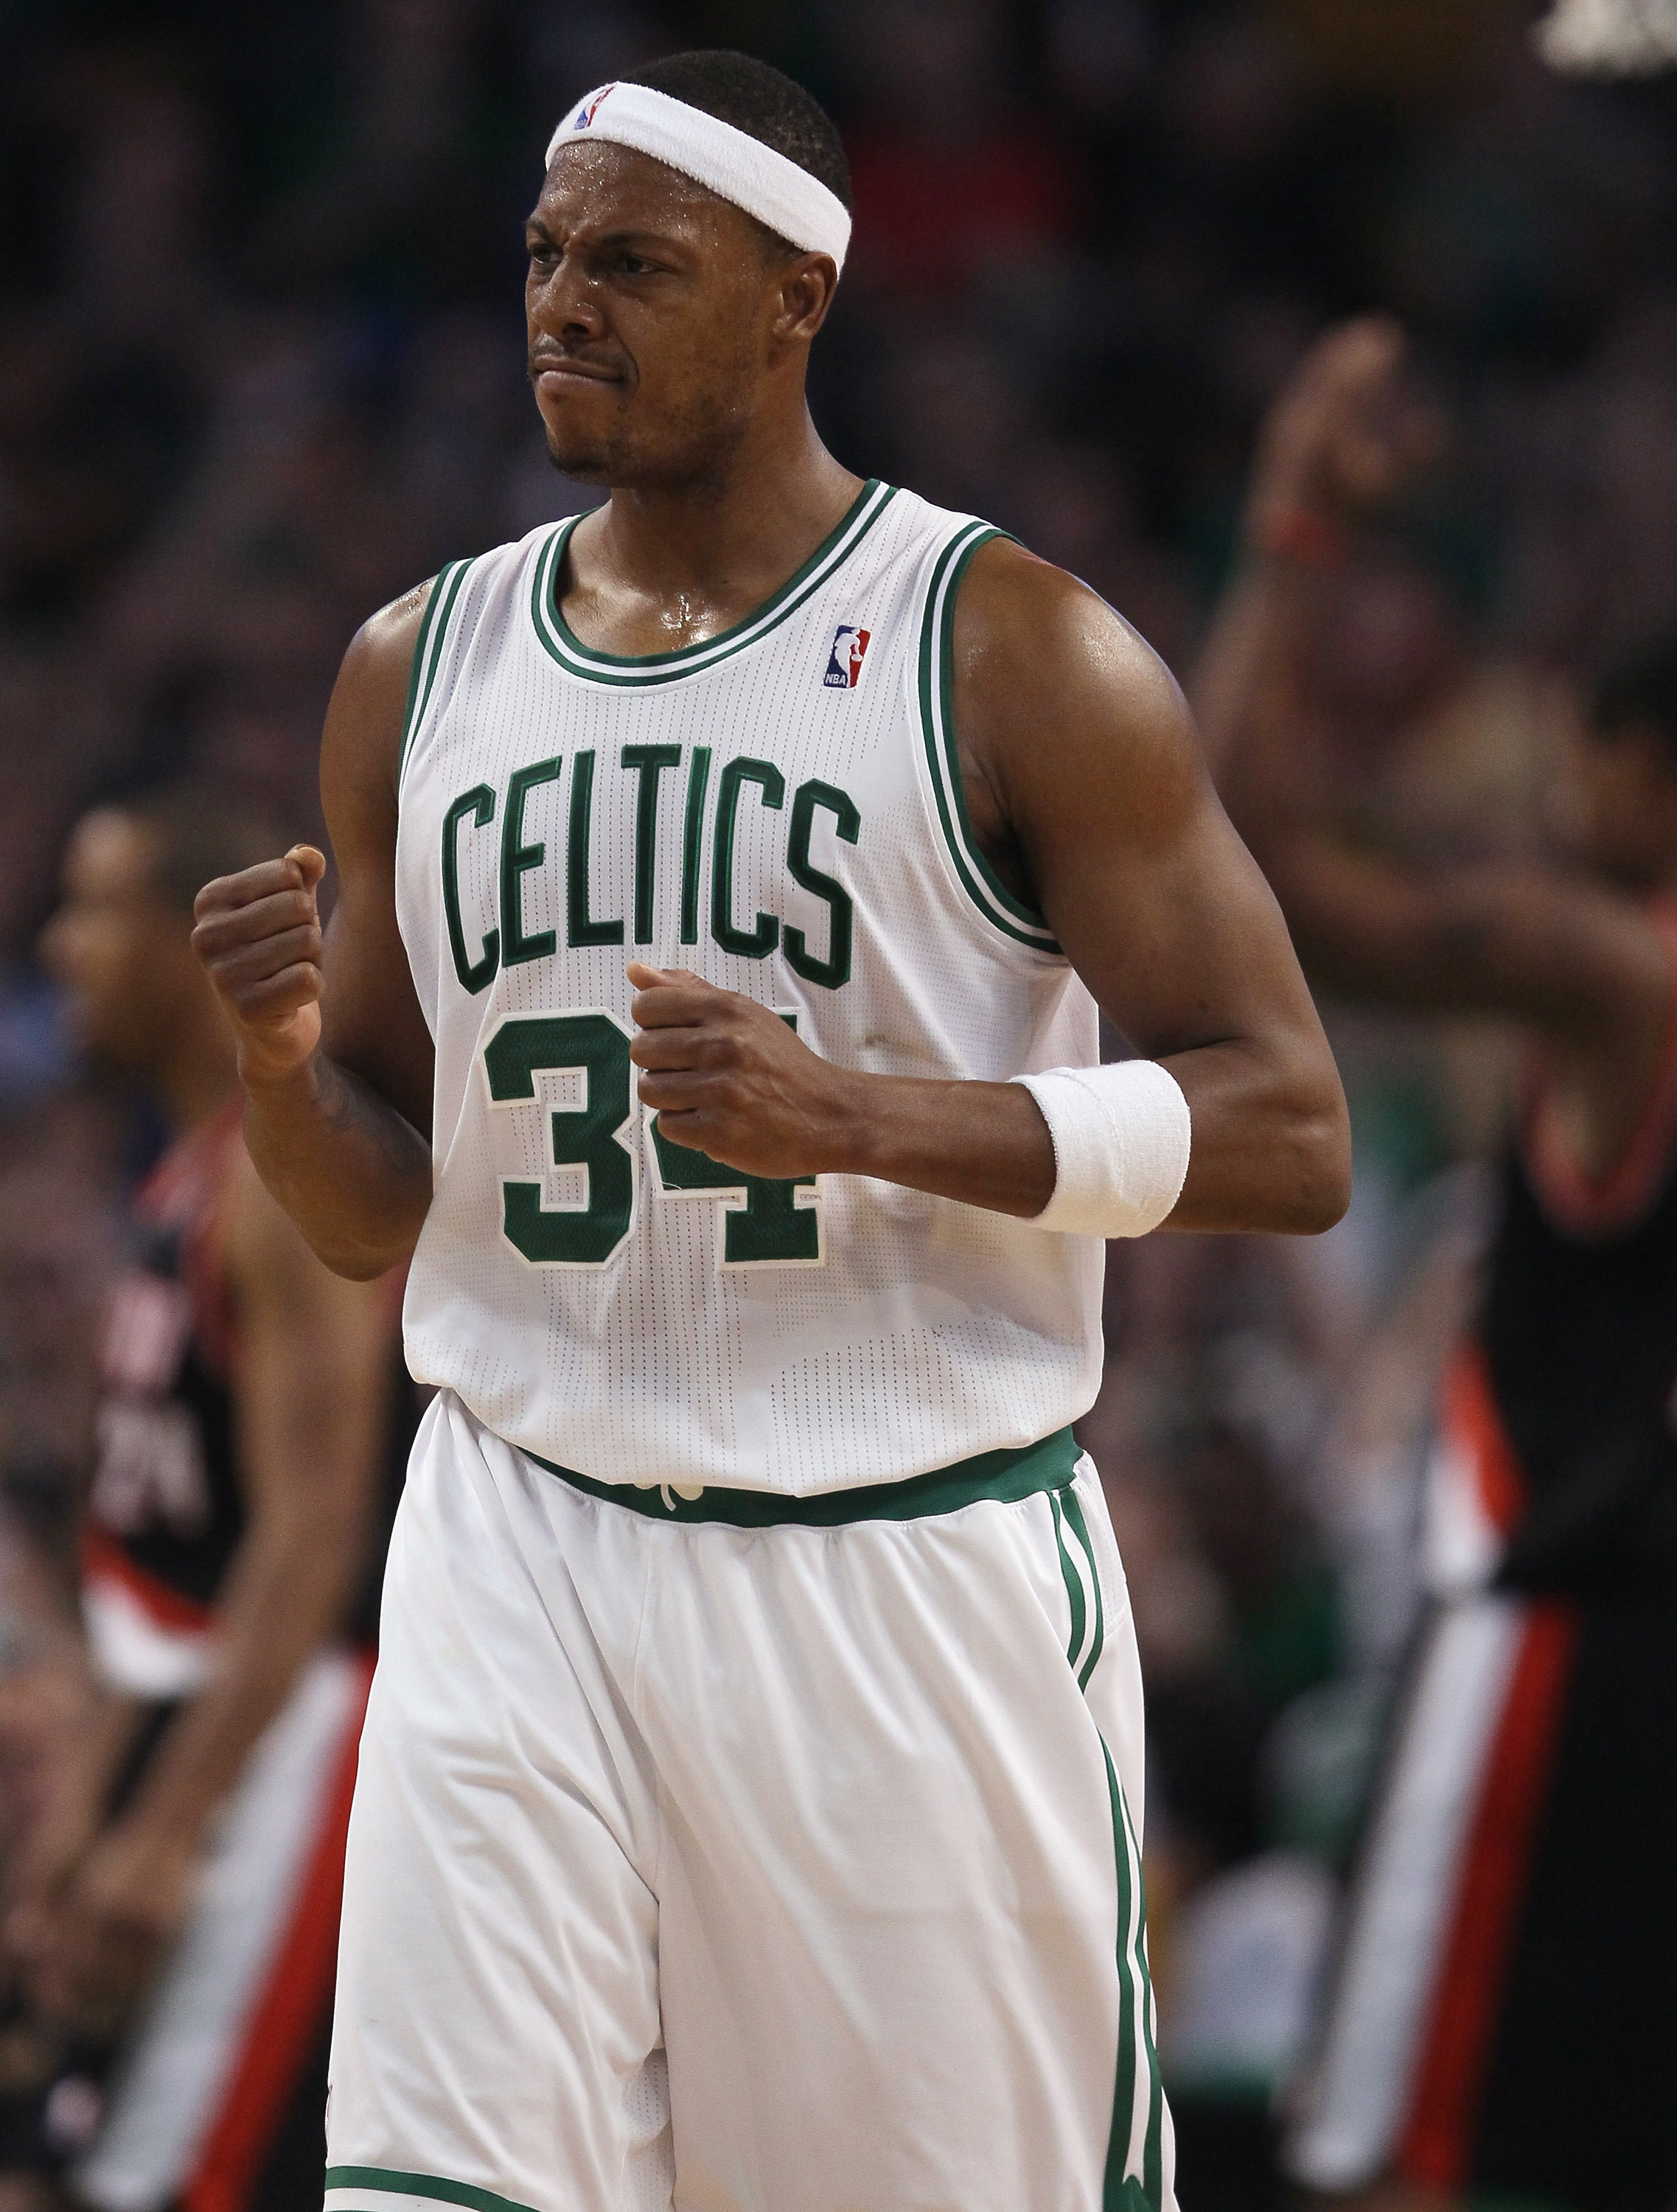 Paul Pierce remembers glory days with Celtics as No. 34 is raised